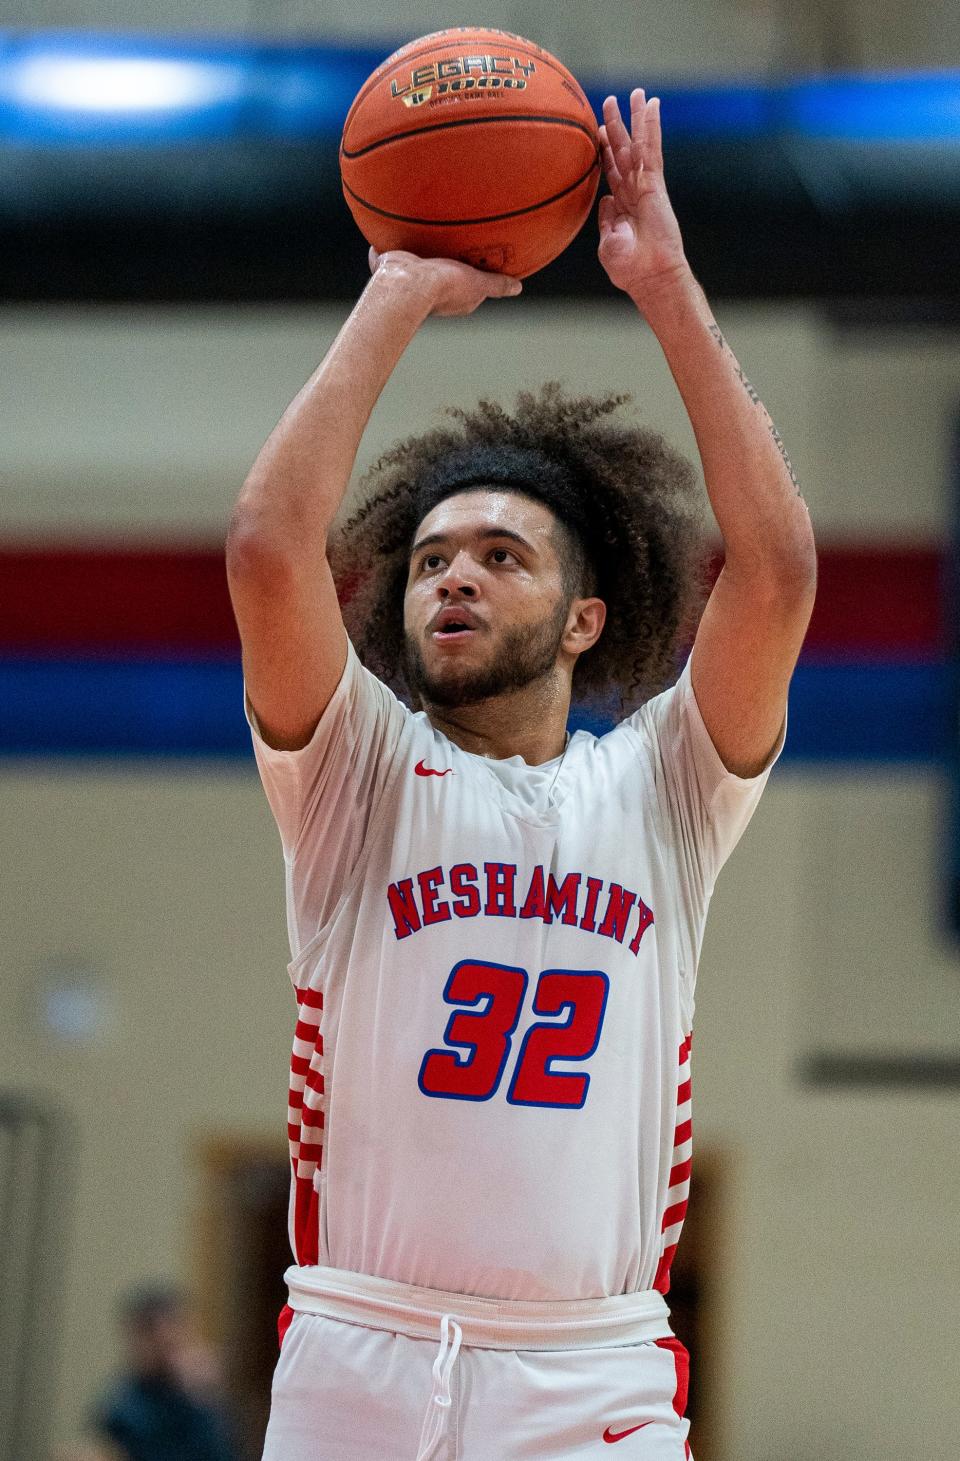 Neshaminy's Nate Townsend (32) shoots a free throw against Council Rock South.